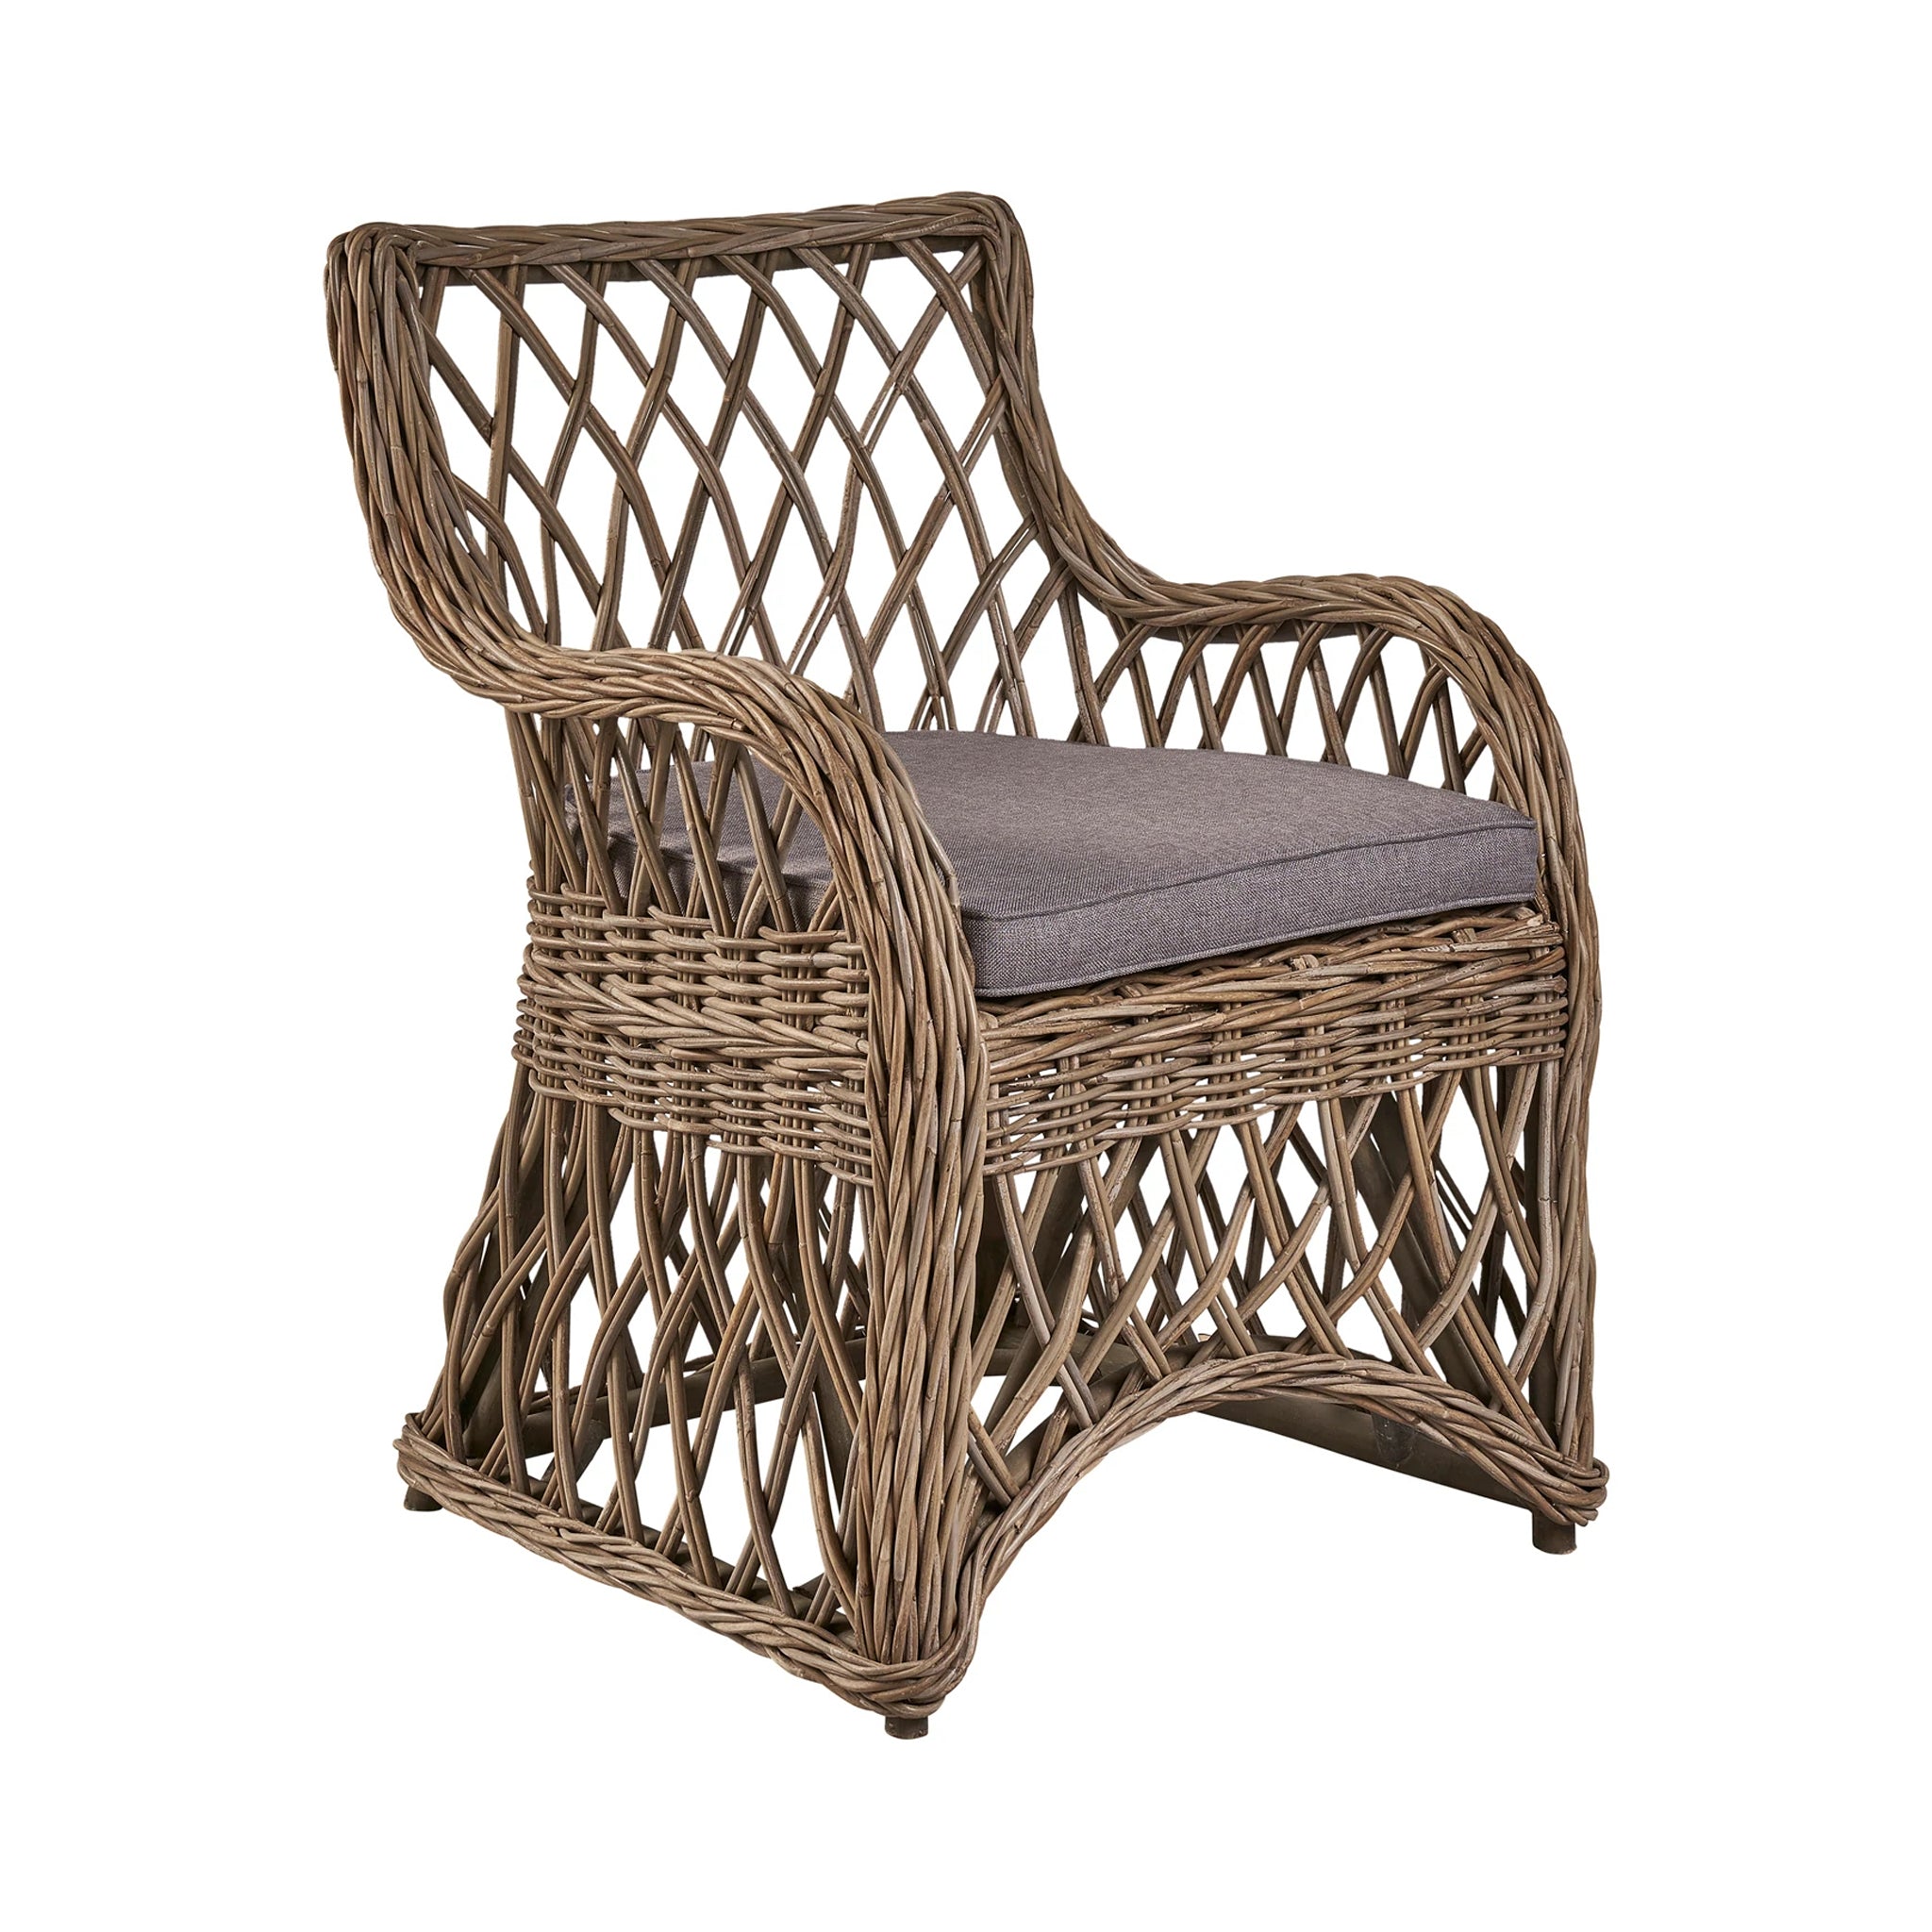 Hand-Woven Rattan Basket Dining Chair - Set of 2